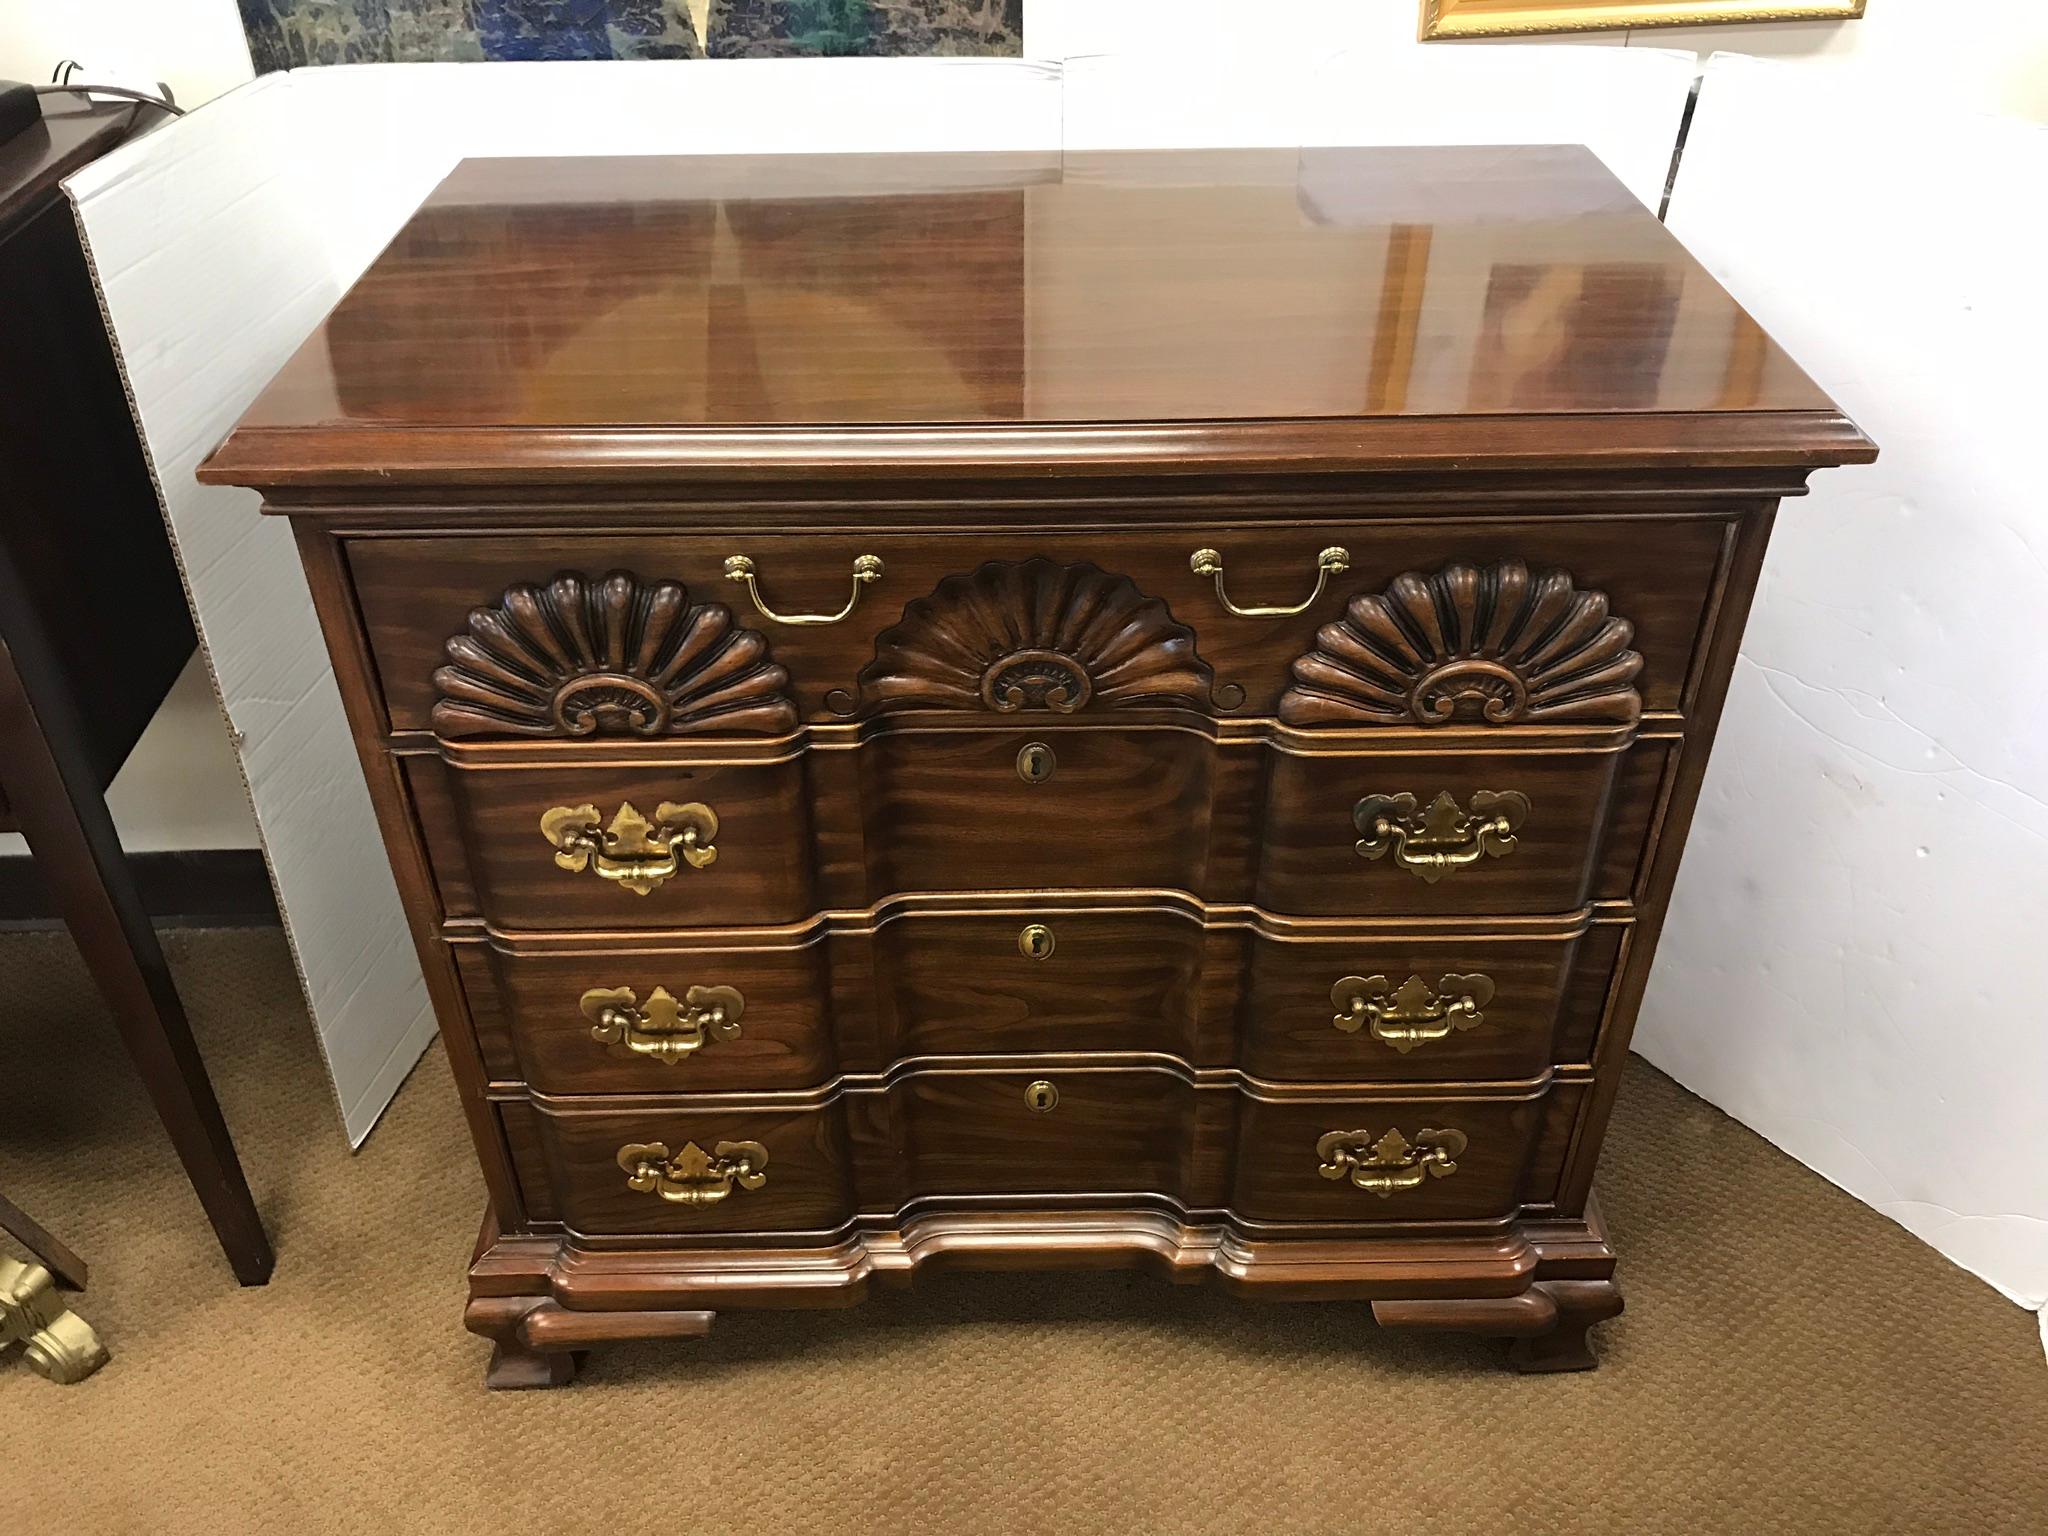 Classic four drawer dark cherry dresser complete with shell carvings at top drawer, circa 1980s.